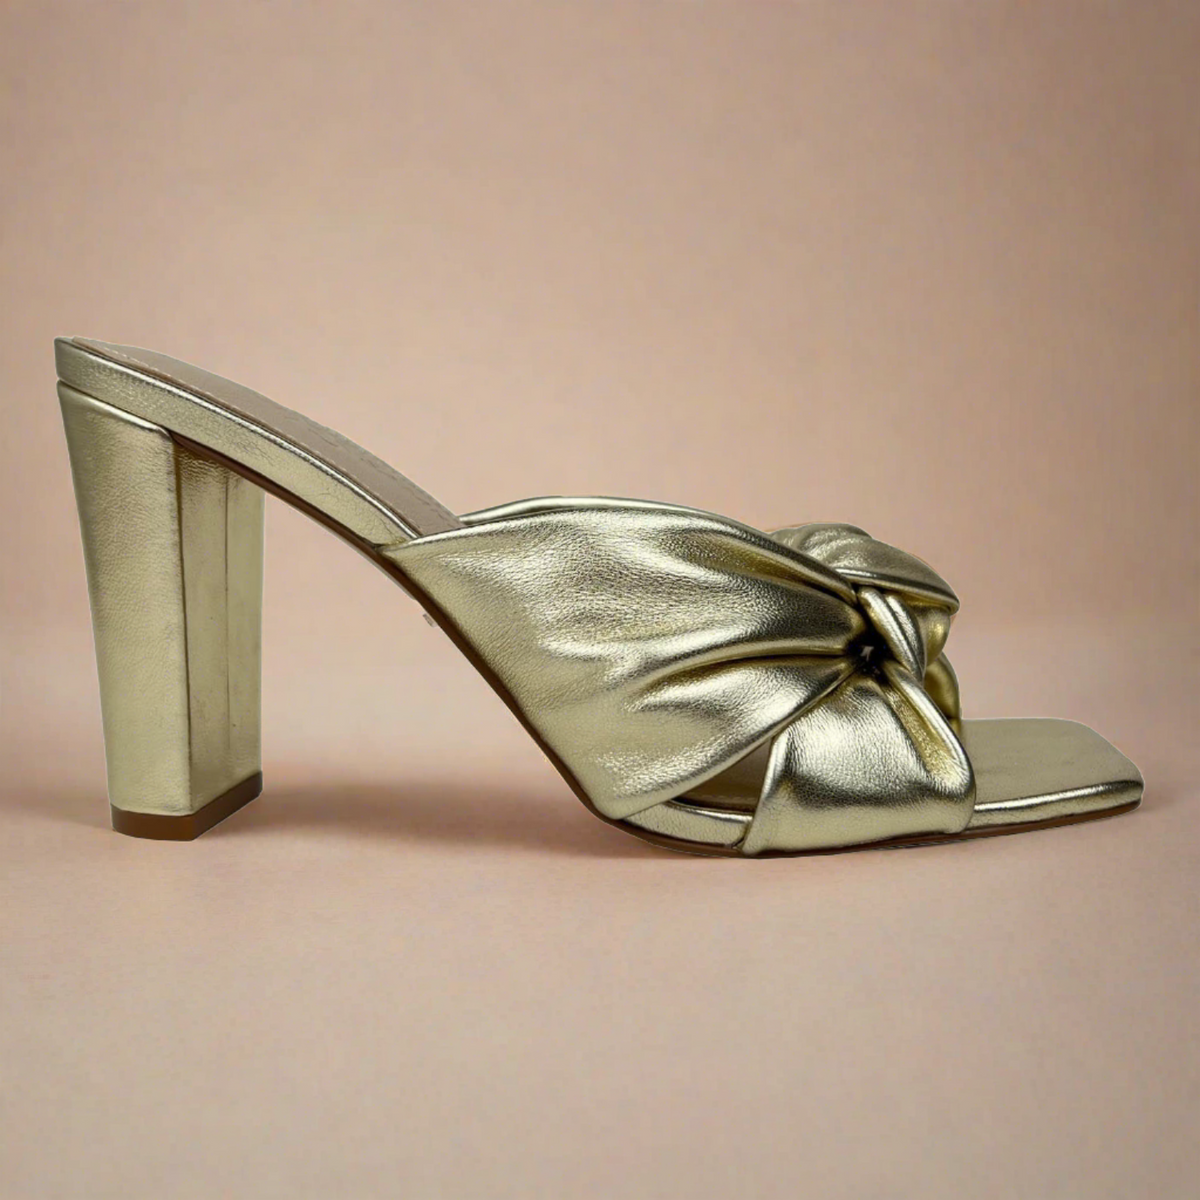 Hazel Knotted Dress Sandal in Gold Leather